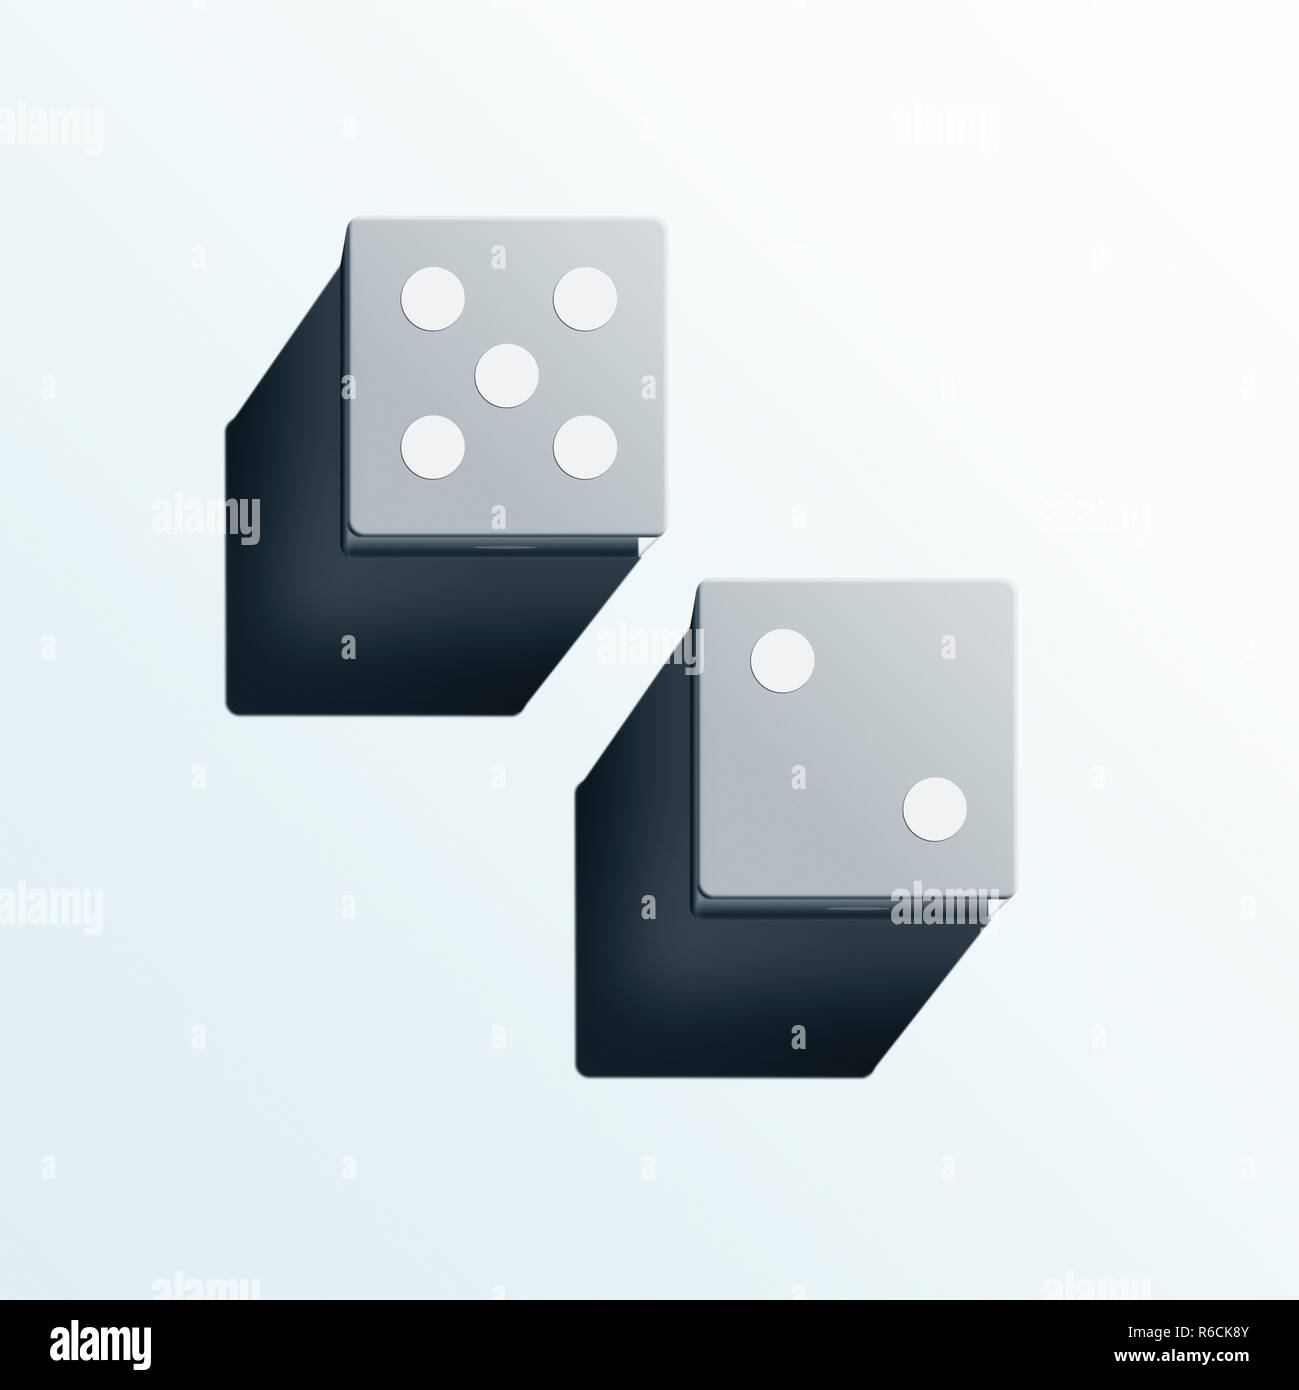 View from above digital image of a pair of dice in black and white on a white background Stock Photo